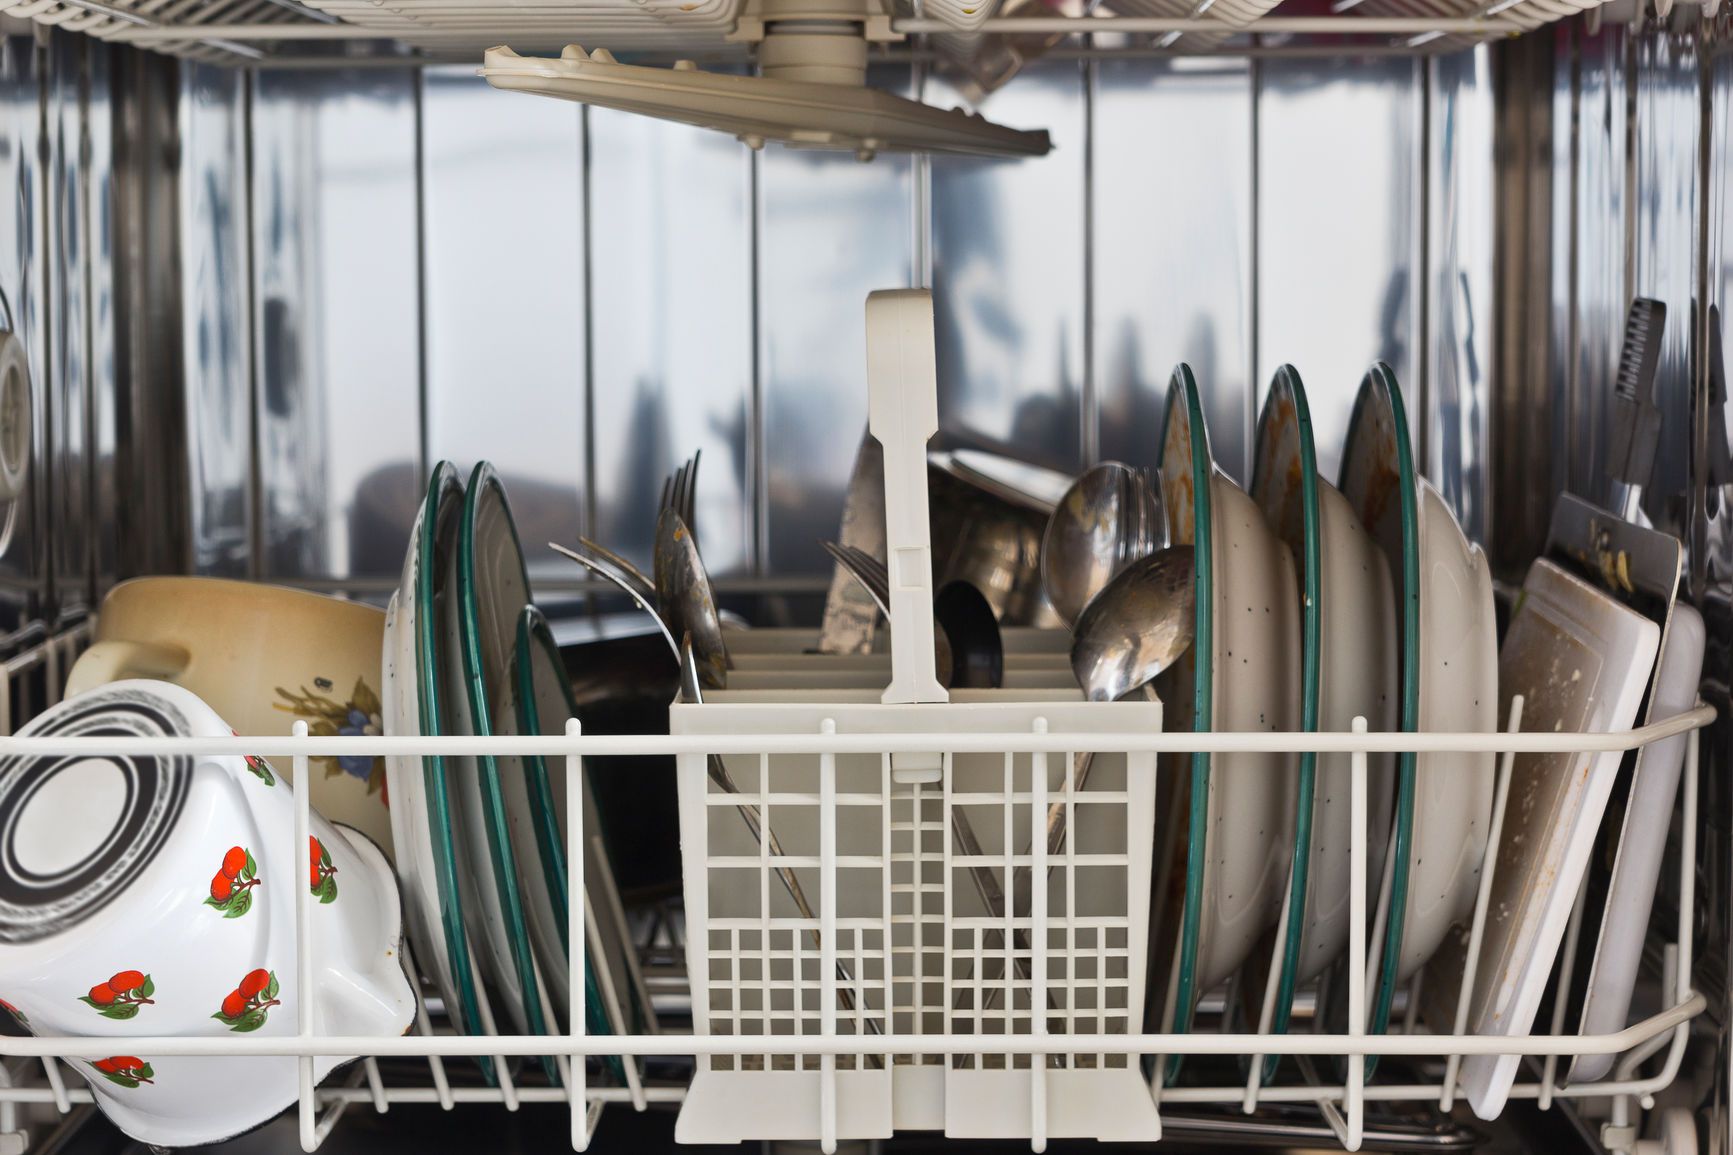 What You Should Never Put In A Dishwasher